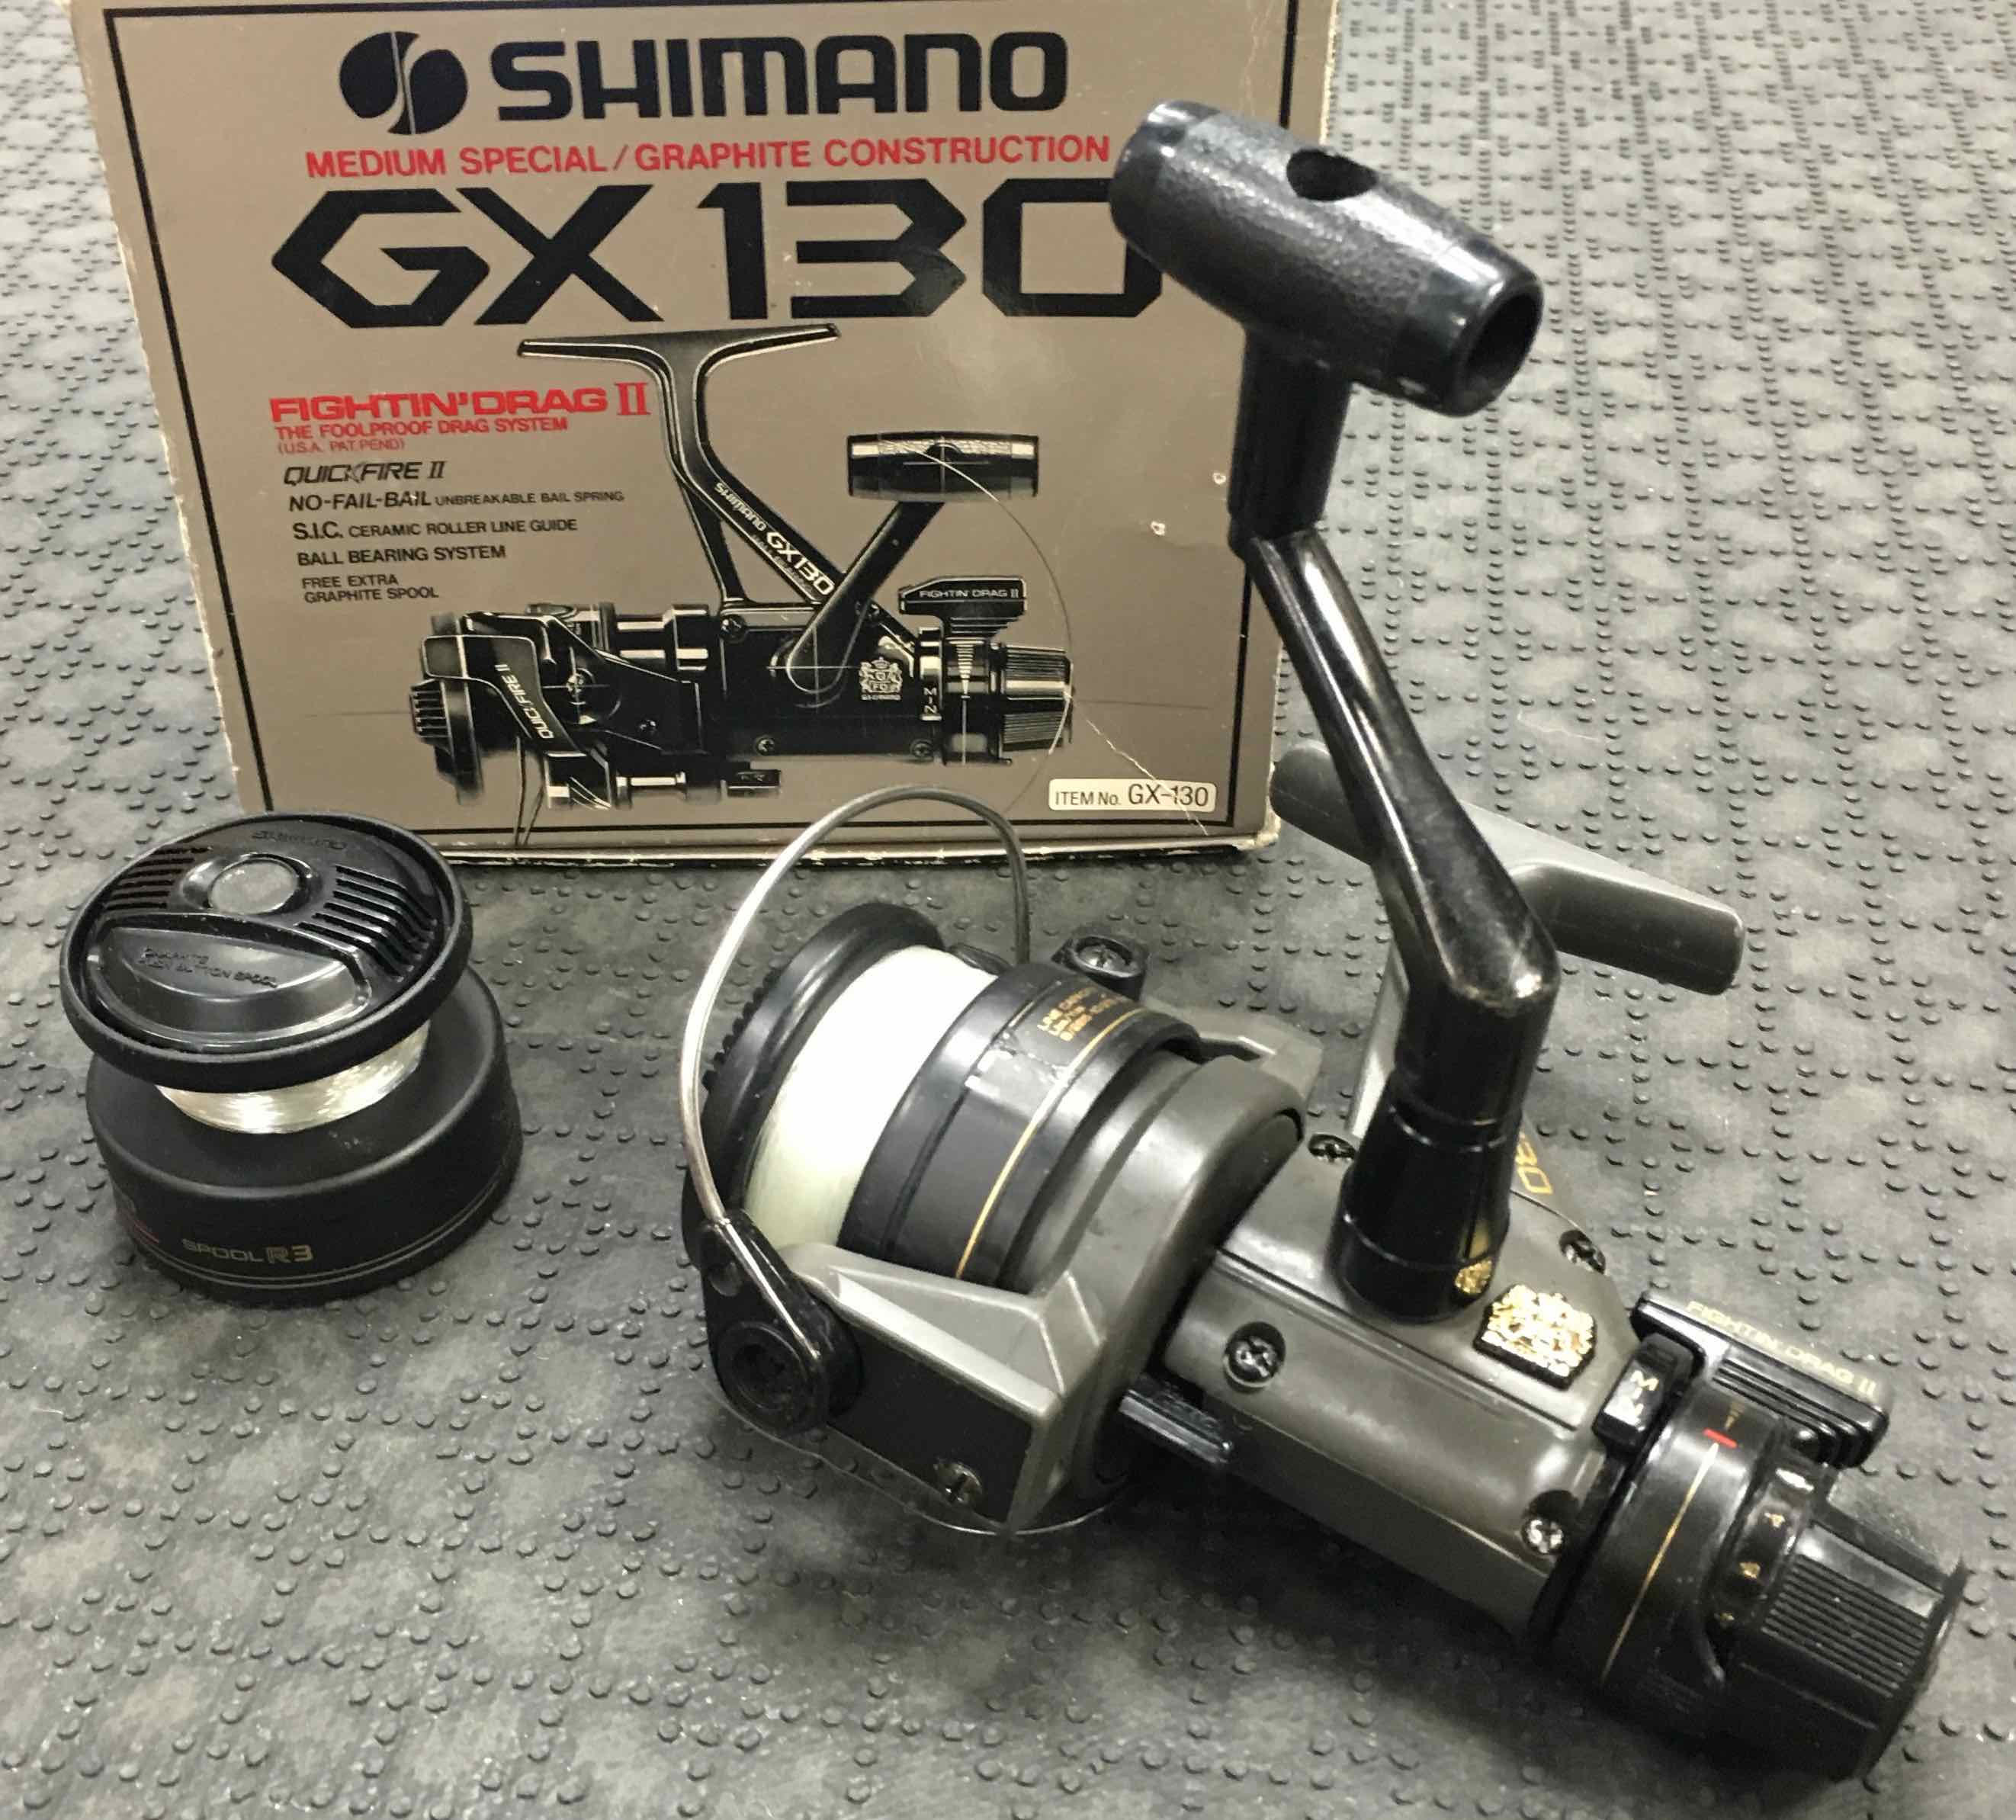 SOLD! – Shimano – GX 130 Spinning Reel c/w Spare Spool – $25 – The